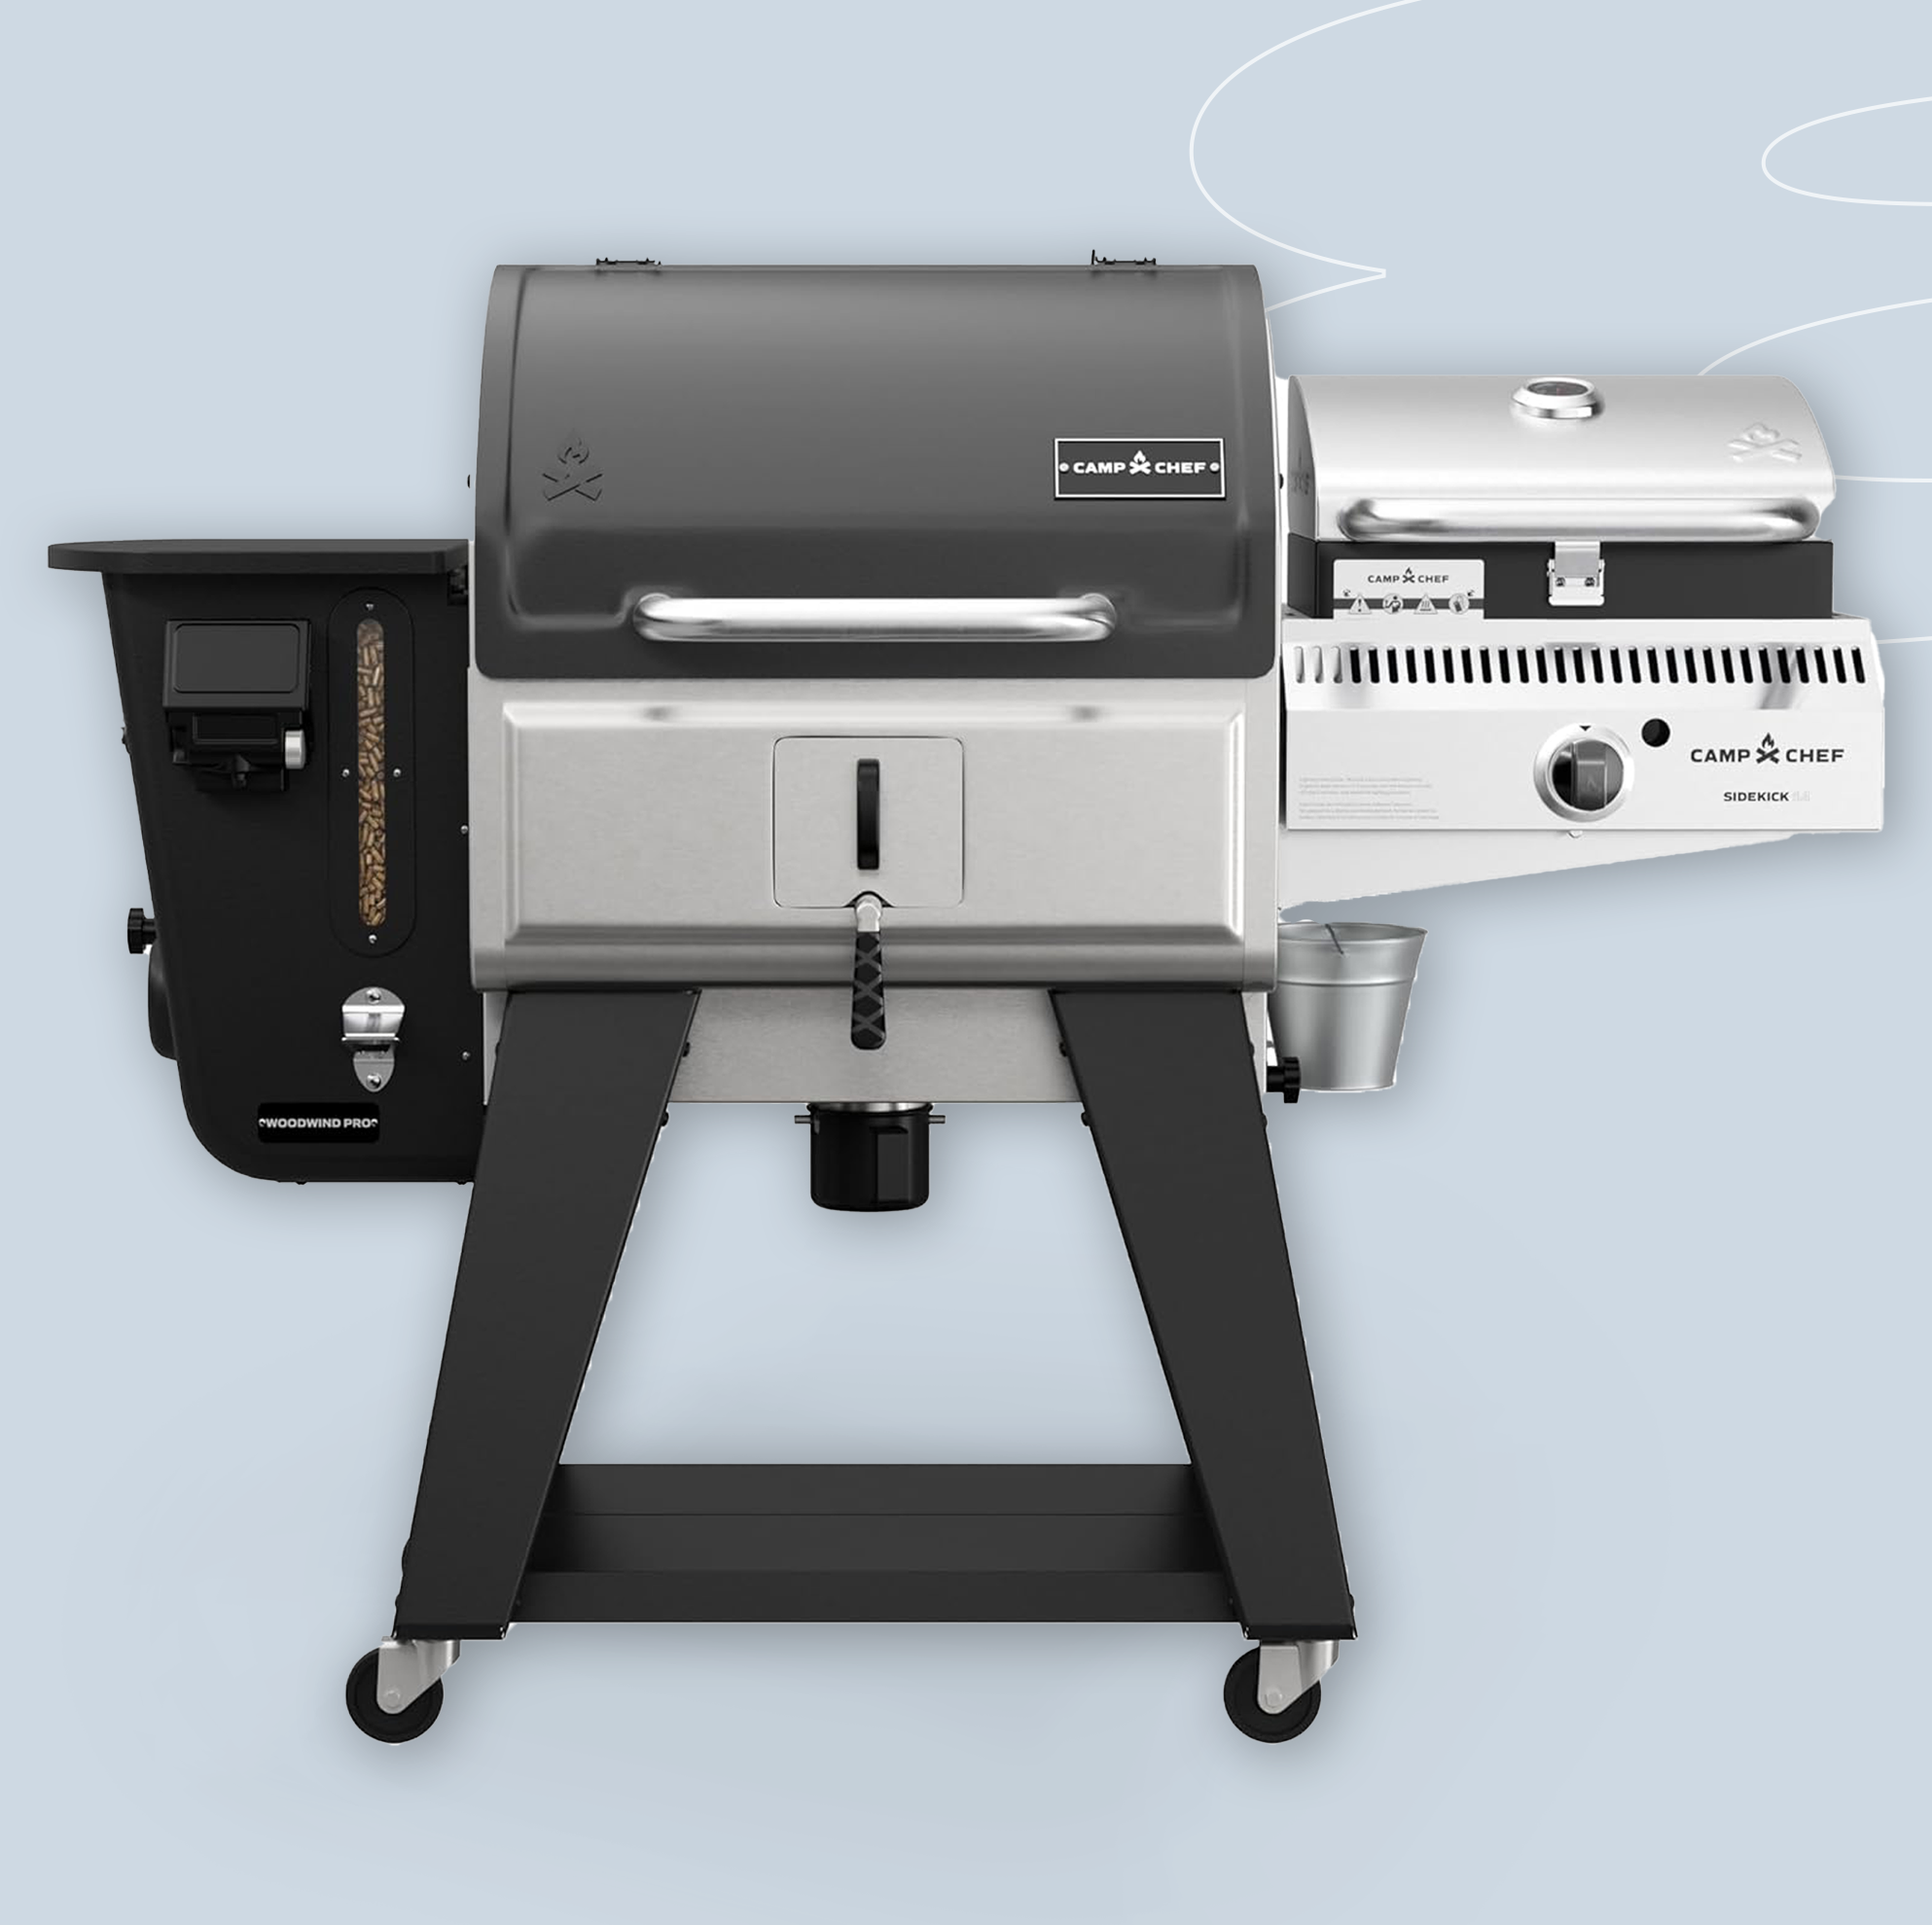 Looking to Buy a Smoker? These Are the 8 Best Models Out There